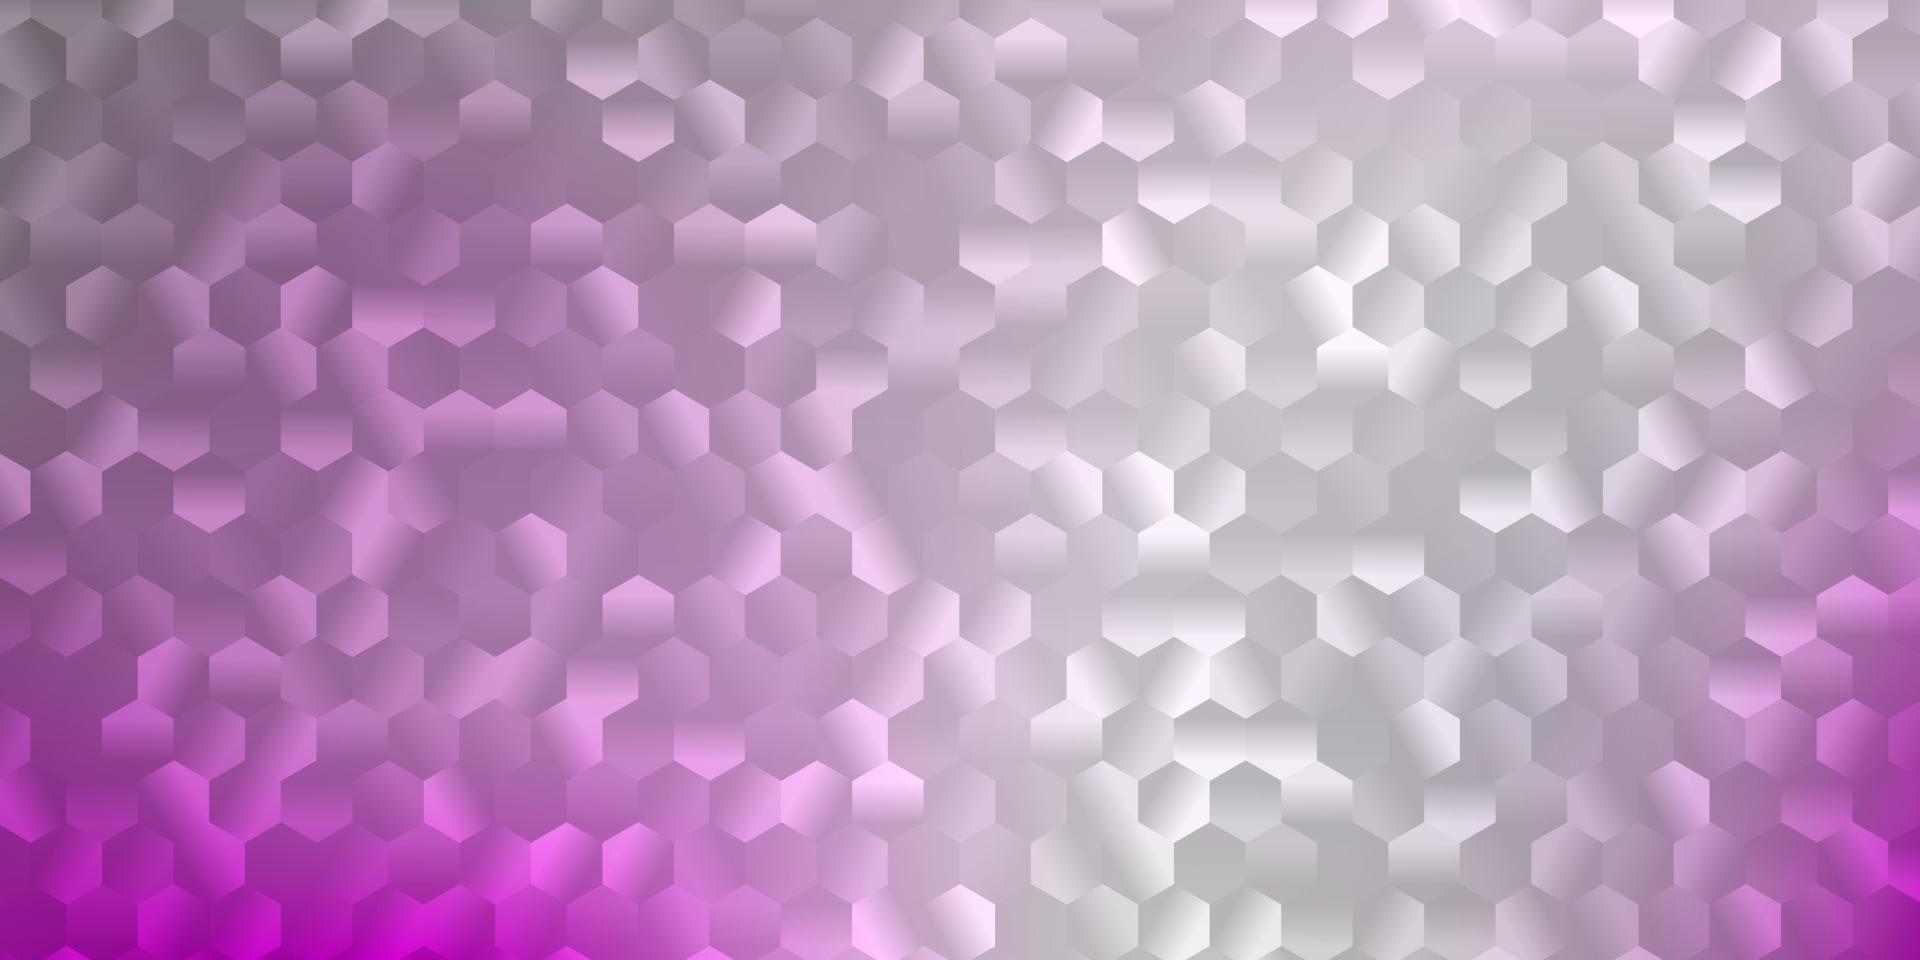 Light purple vector background with hexagonal shapes.